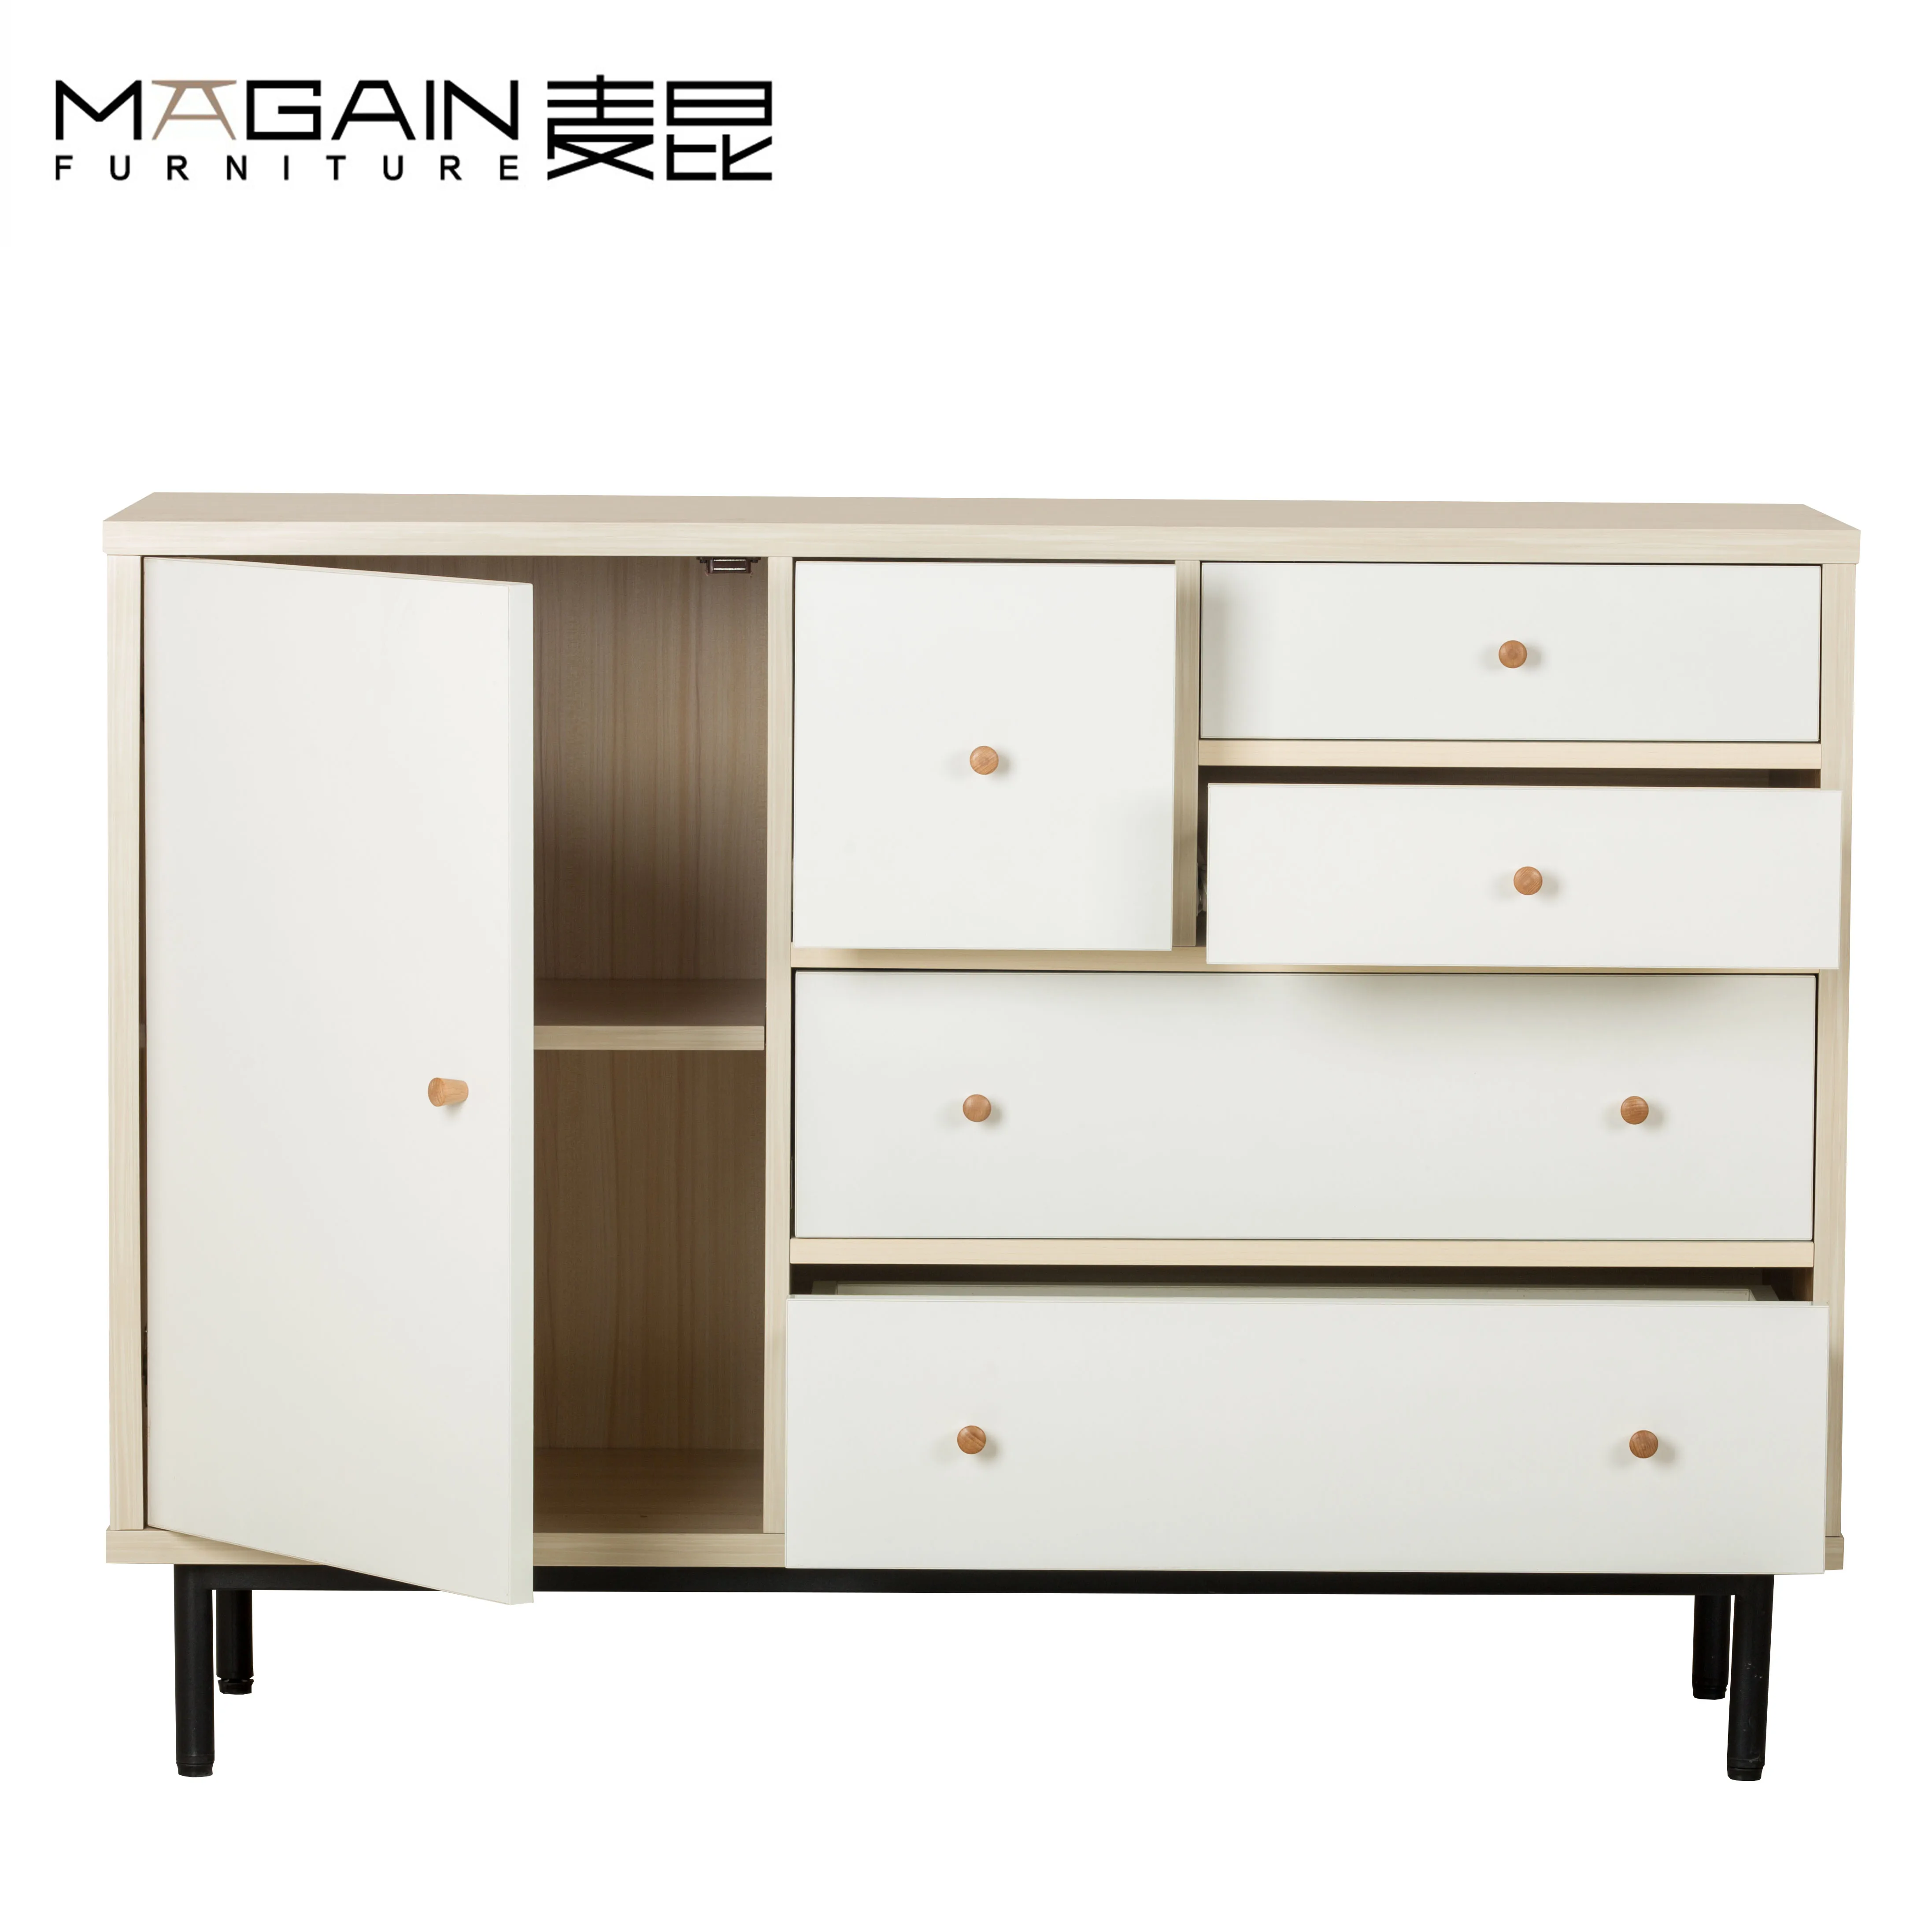 Wooden Chest With Metal Legs Storage Cabinet 6 Drawers Buy